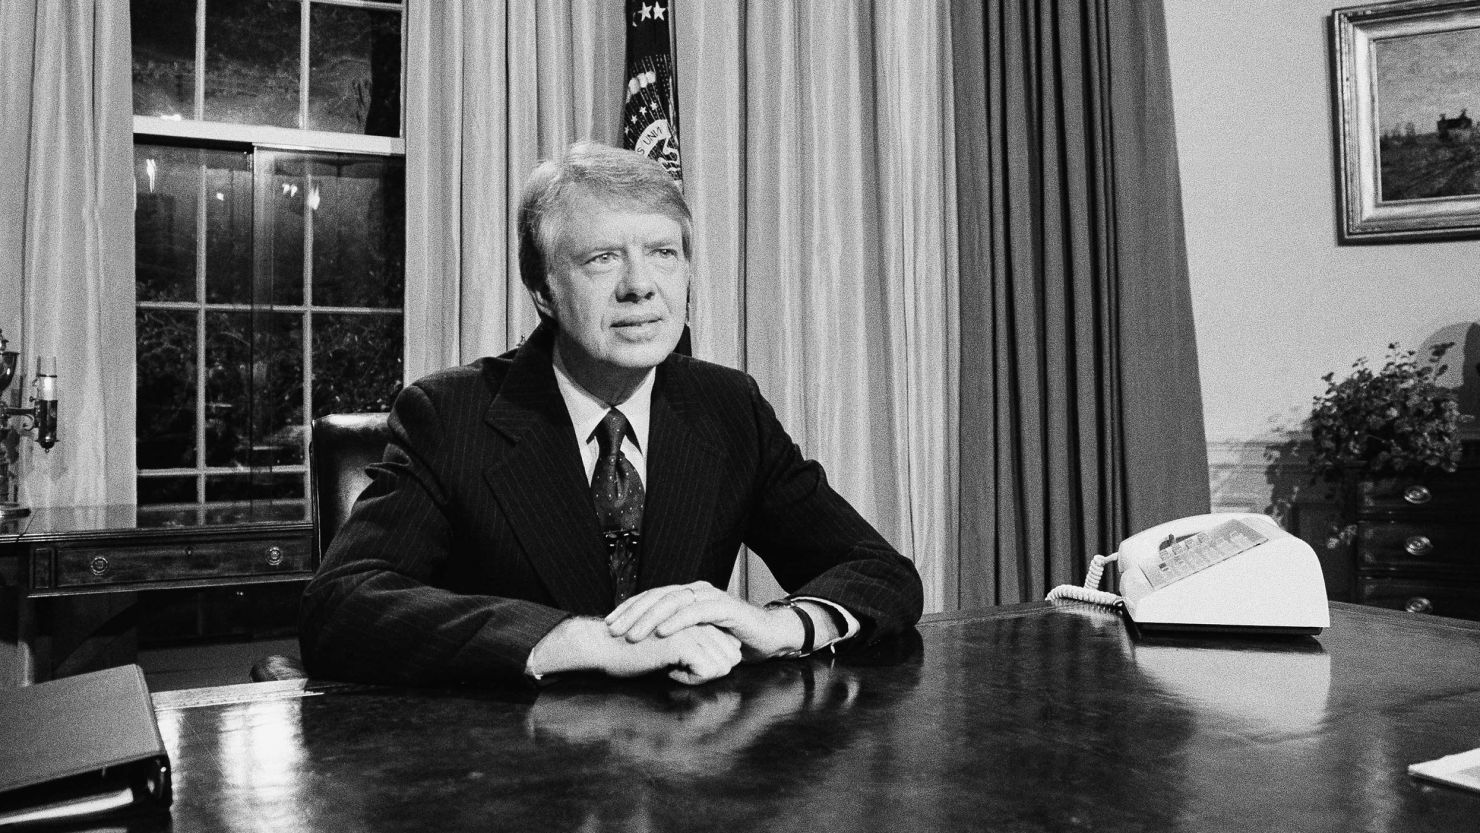 President Jimmy Carter at his desk in the Oval Office prior to delivering a speech on April 19, 1977.